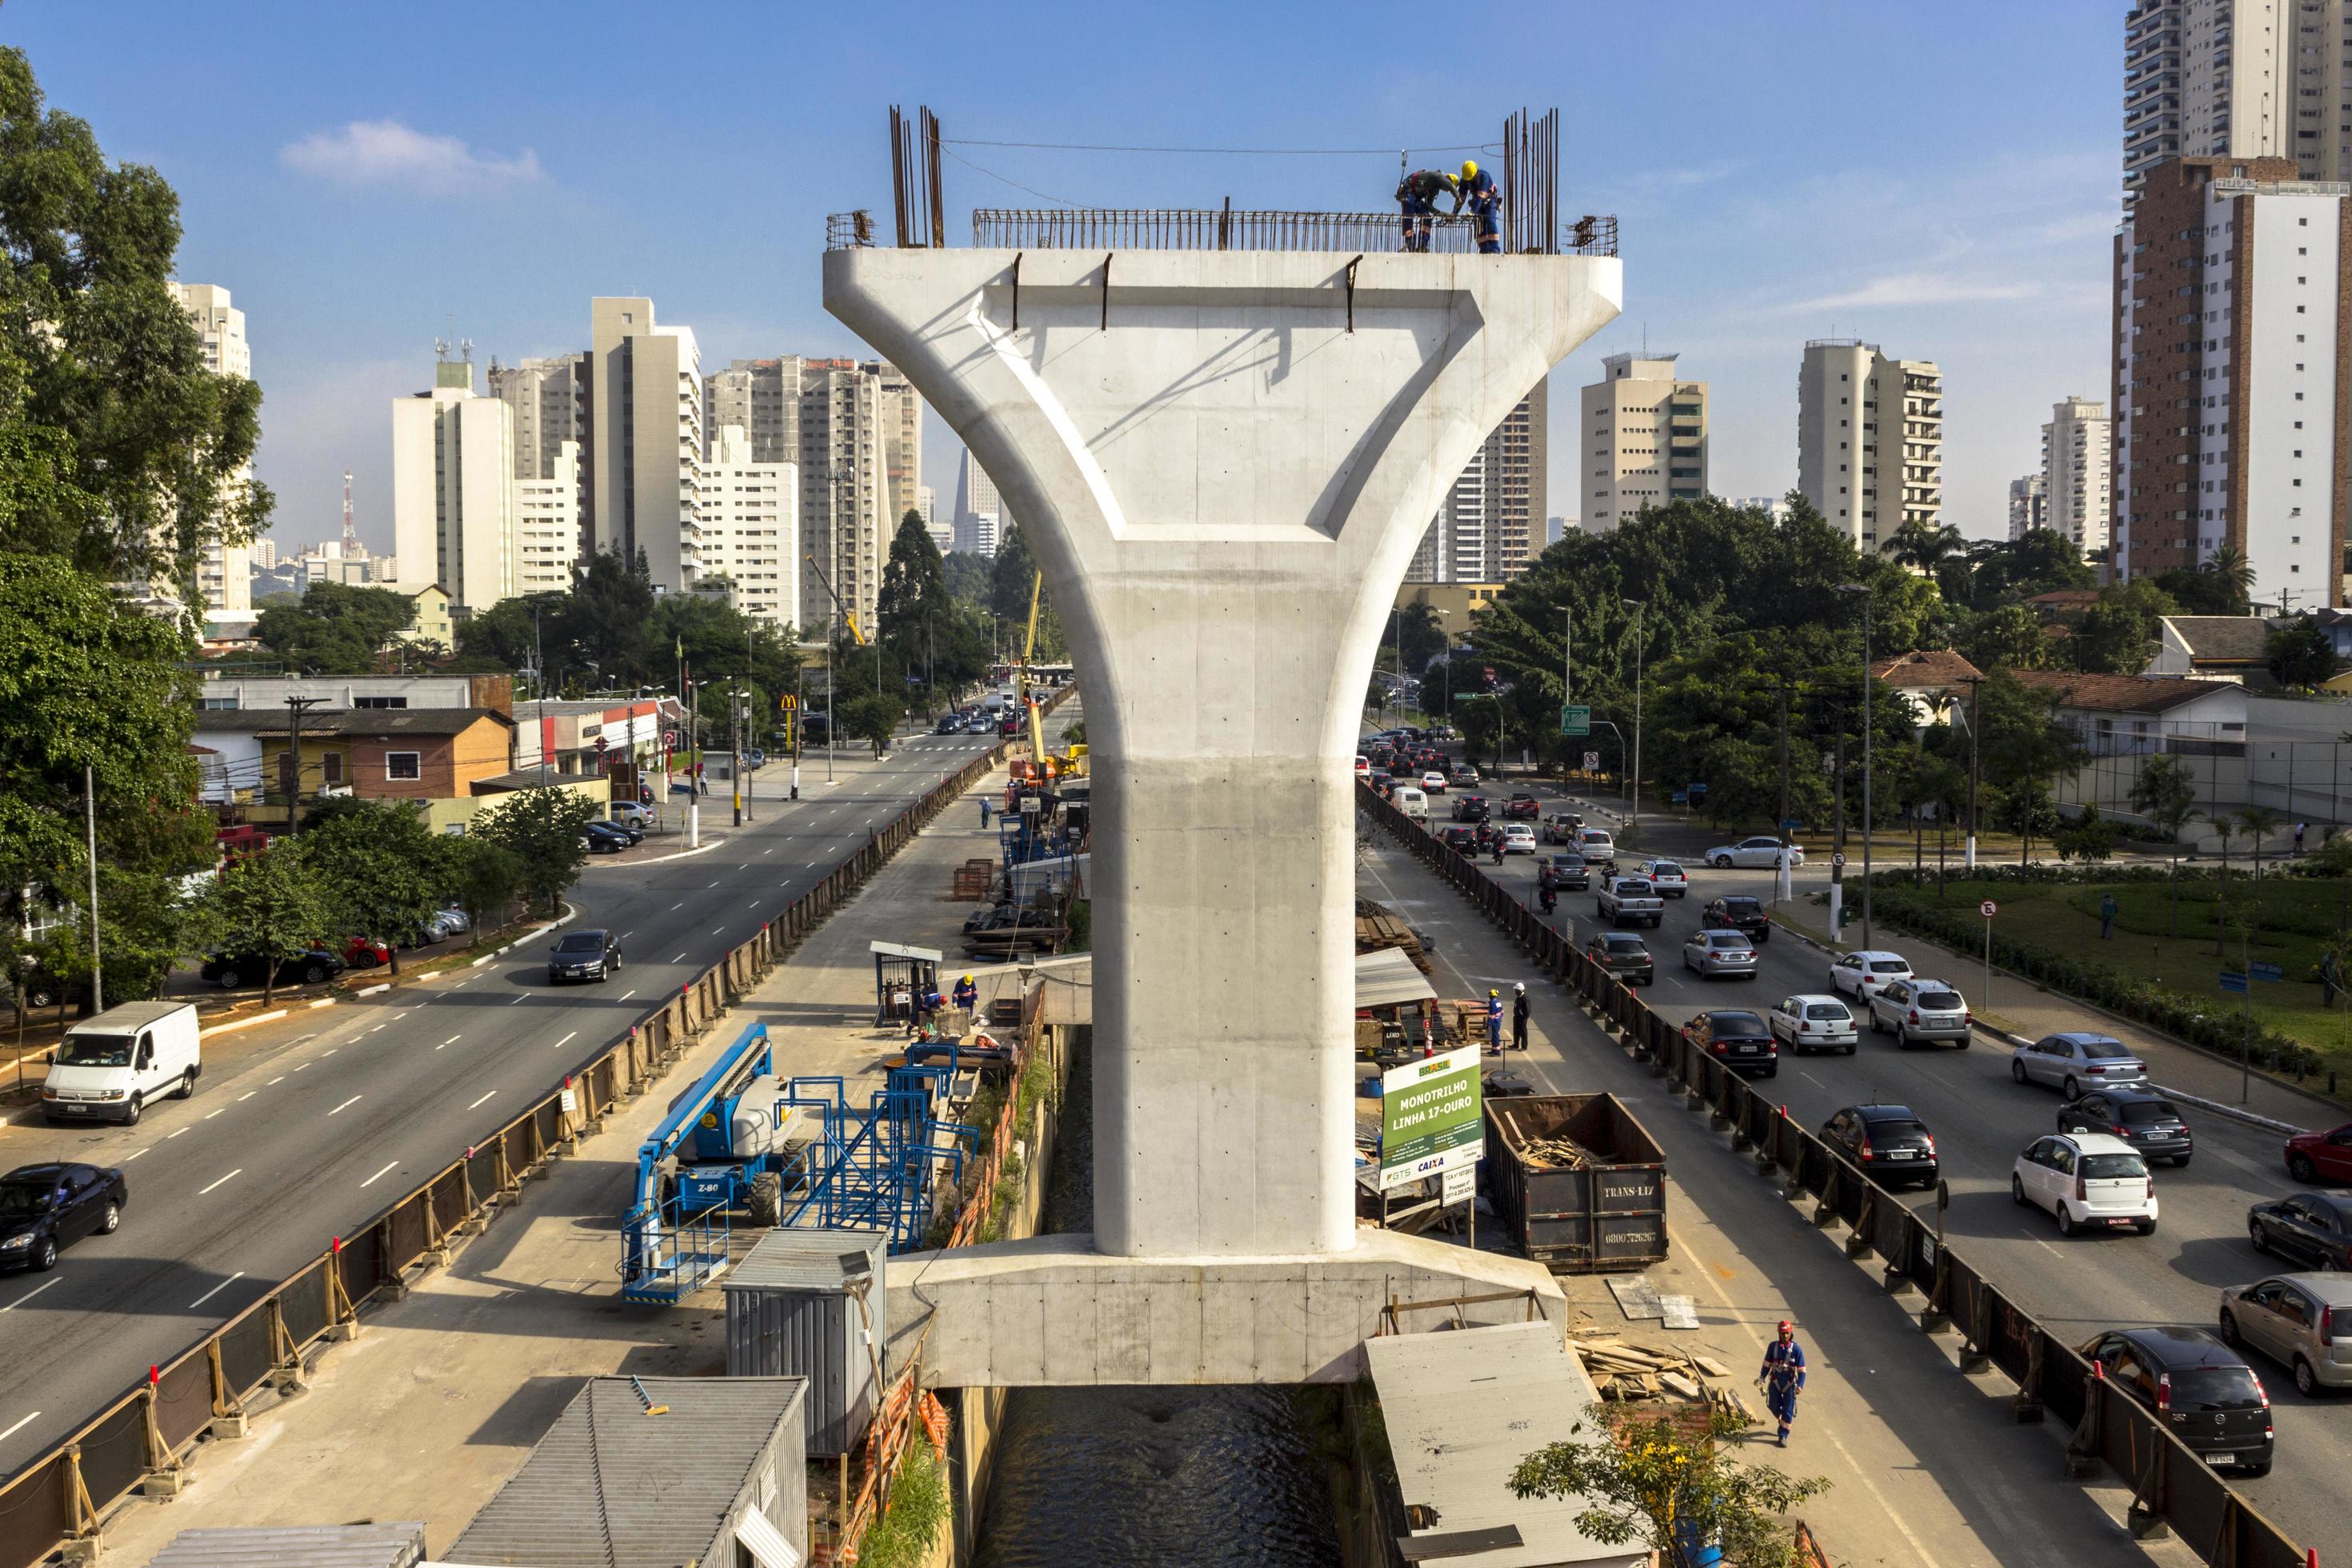 https://static.vecteezy.com/system/resources/previews/003/916/641/large_2x/sao-paulo-brazil-2013-workers-in-the-construction-of-the-elevated-metro-track-on-roberto-marinho-avenue-in-sao-paulo-brazil-free-photo.jpg